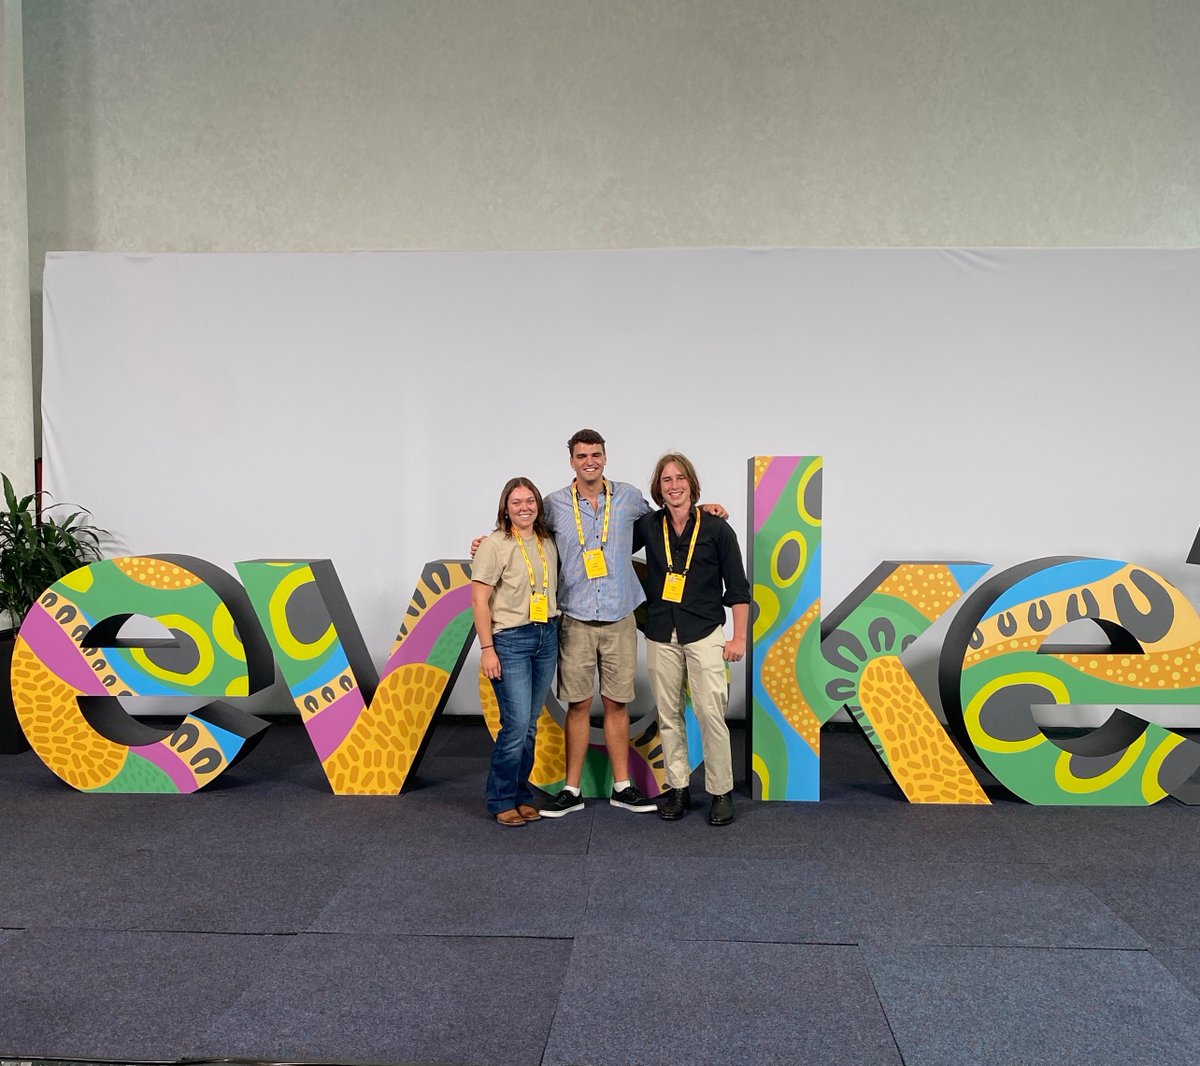 We have arrived in Perth for Agrifutures EvokeAg this week with participants Luke, Savan and Bianca! We are all looking forward to a jam-packed two days! Stay tuned for what we get up to in WA! #GapYearAU #WorkAndTravel#GapYear #AGCAREERSTART #YoungFarmers #FutureFarmers